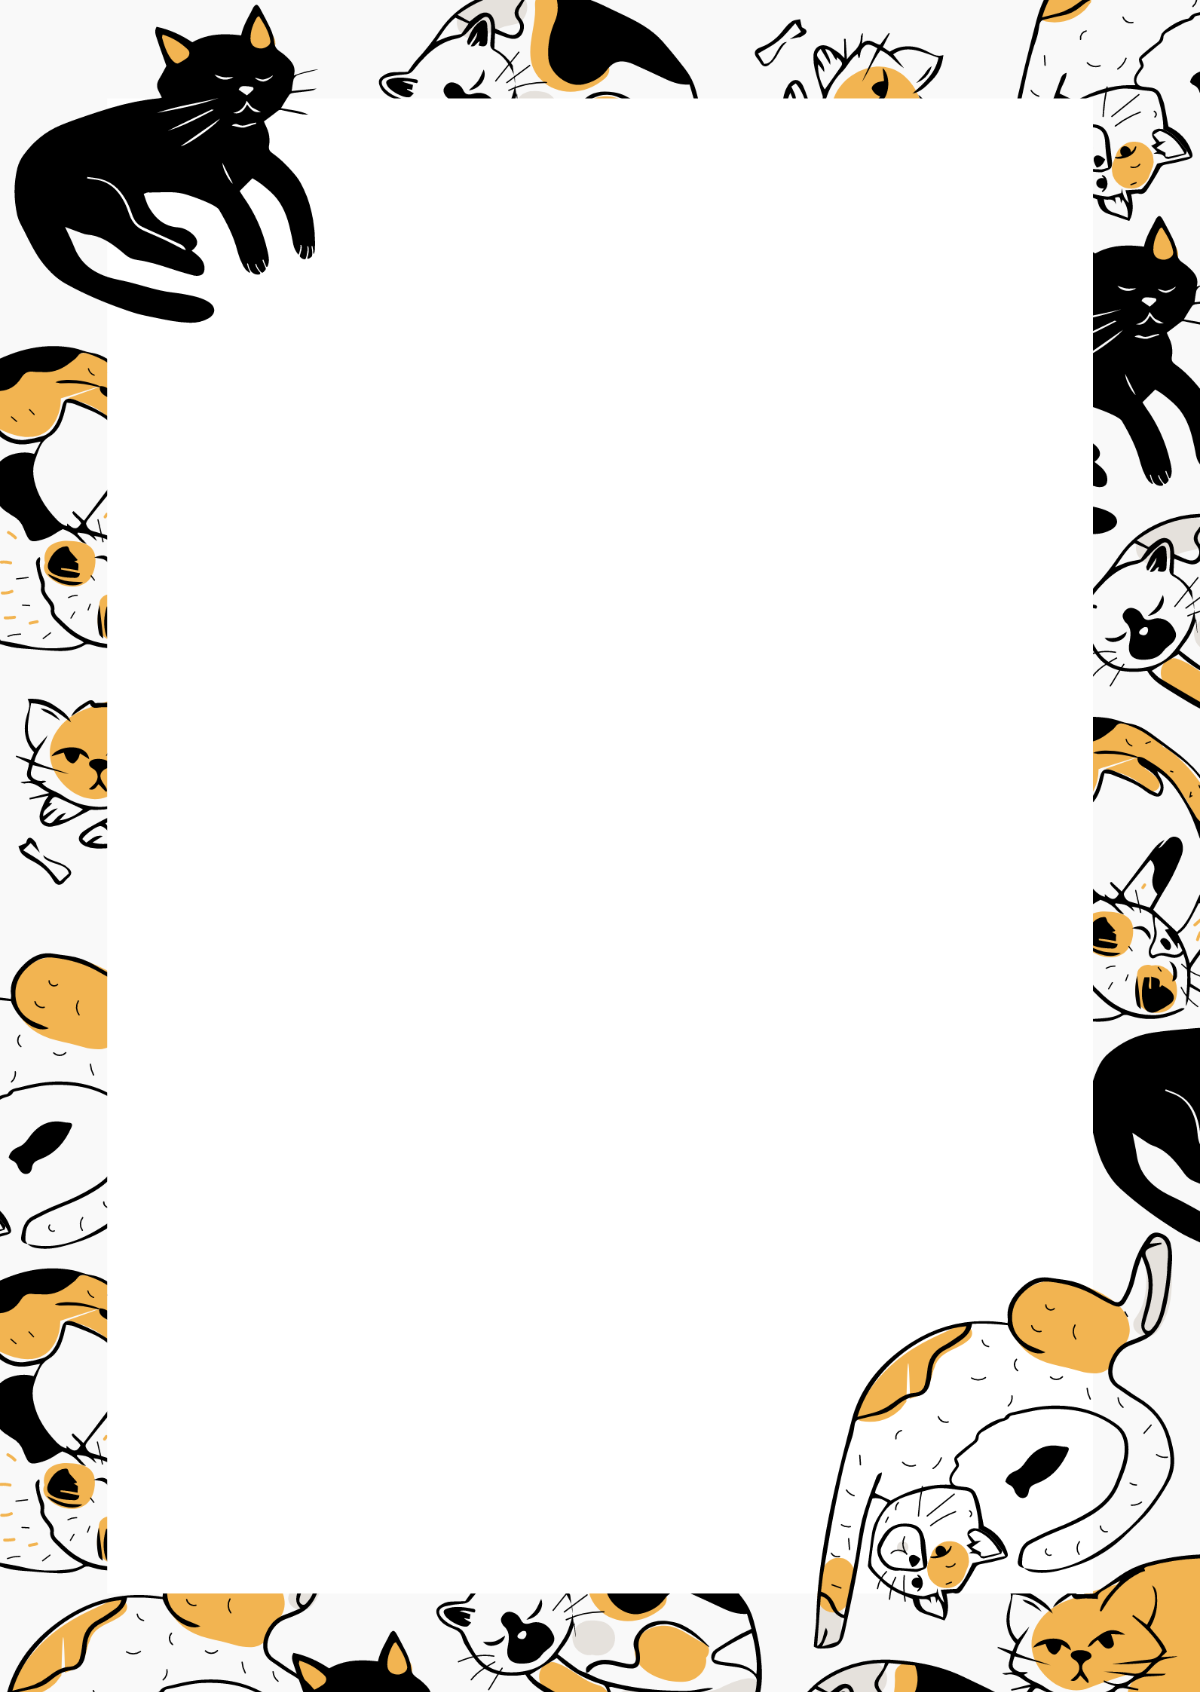 Doodle Page Border Template